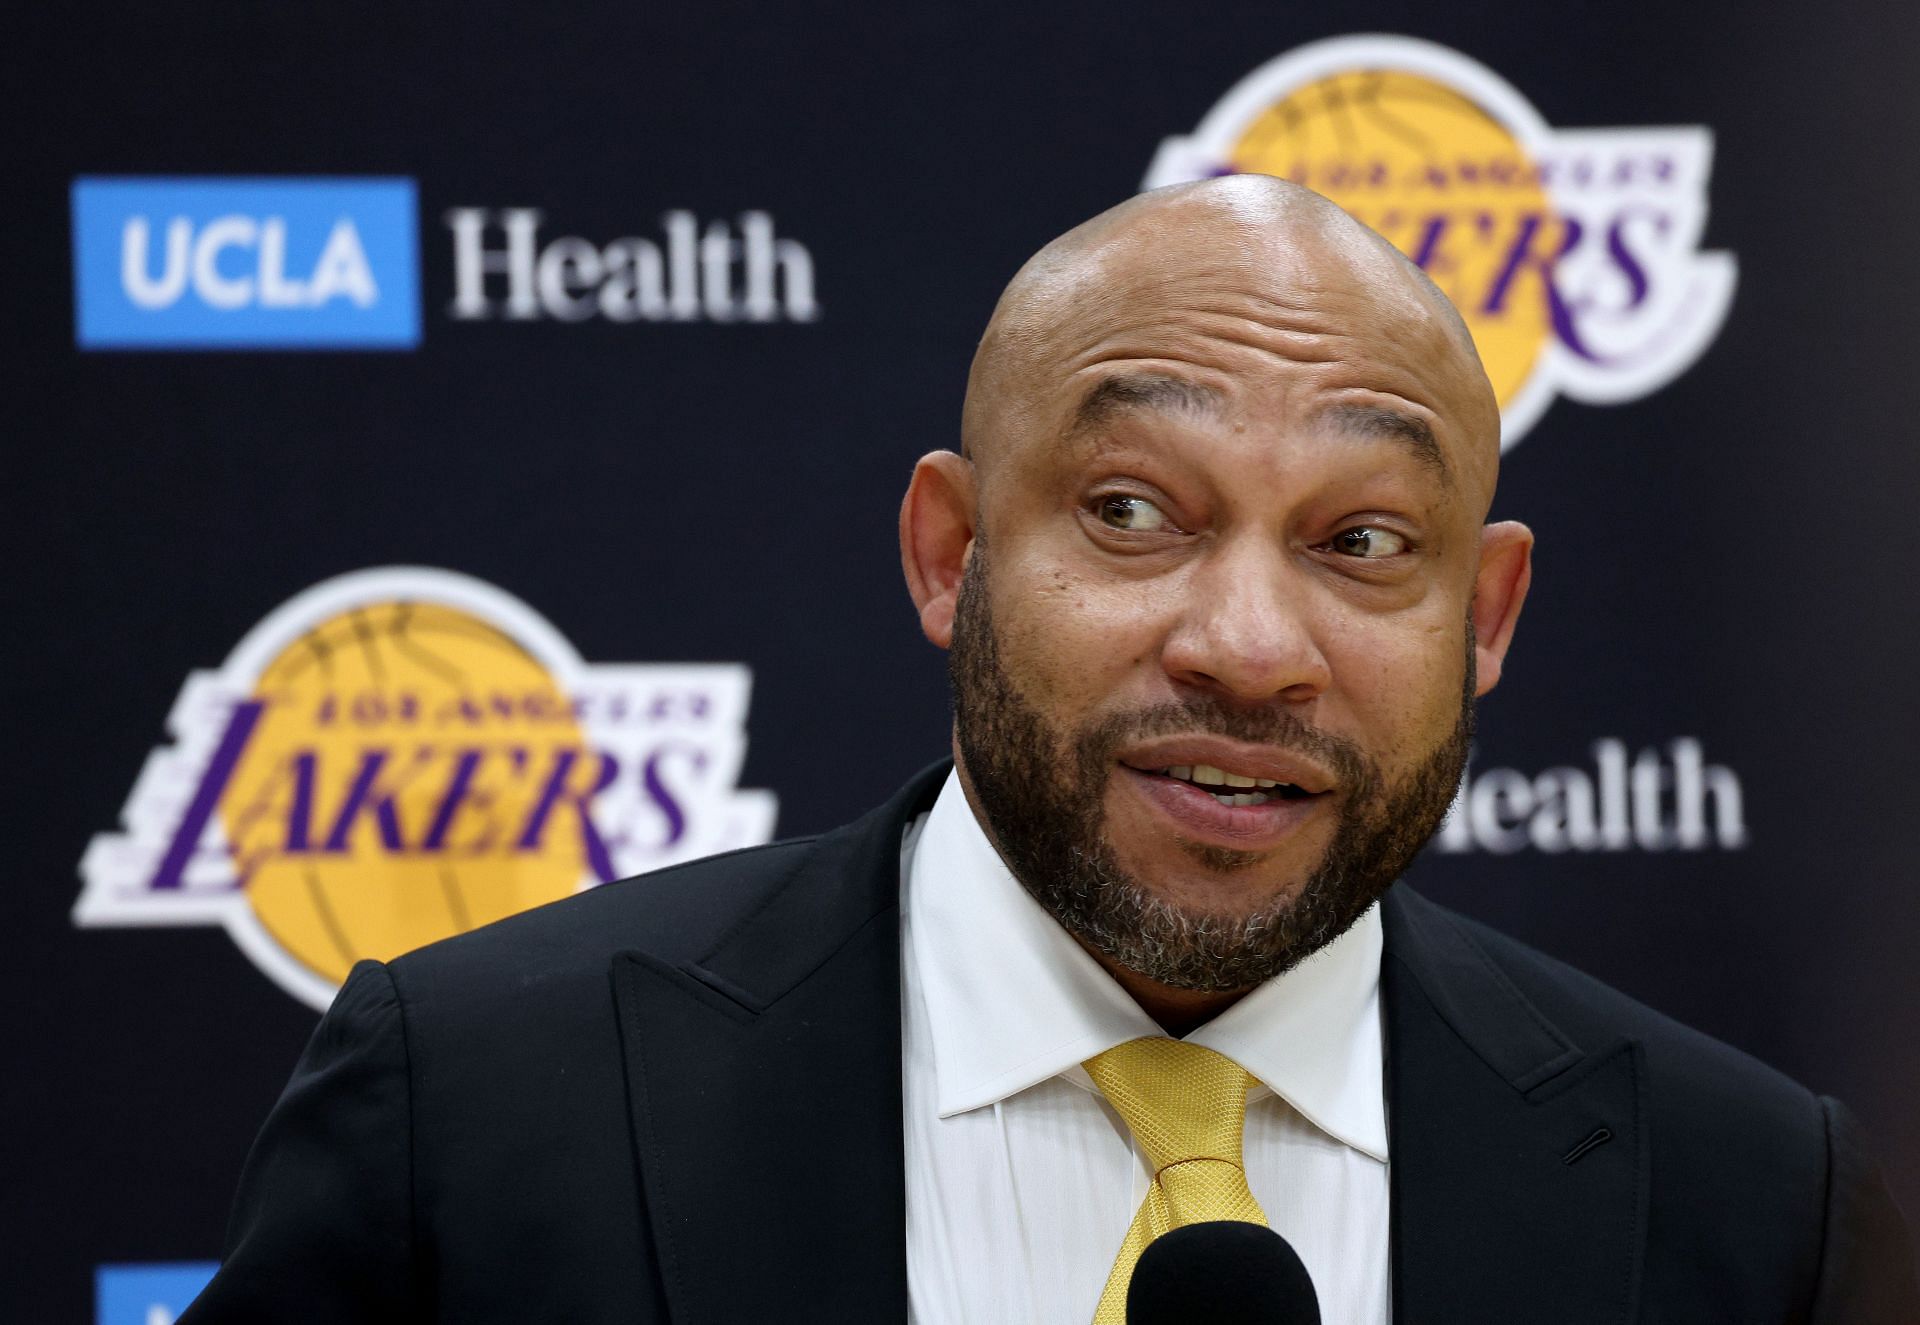 Ham is a rookie head coach who will lead the Lakers next season (Image via Getty Images)